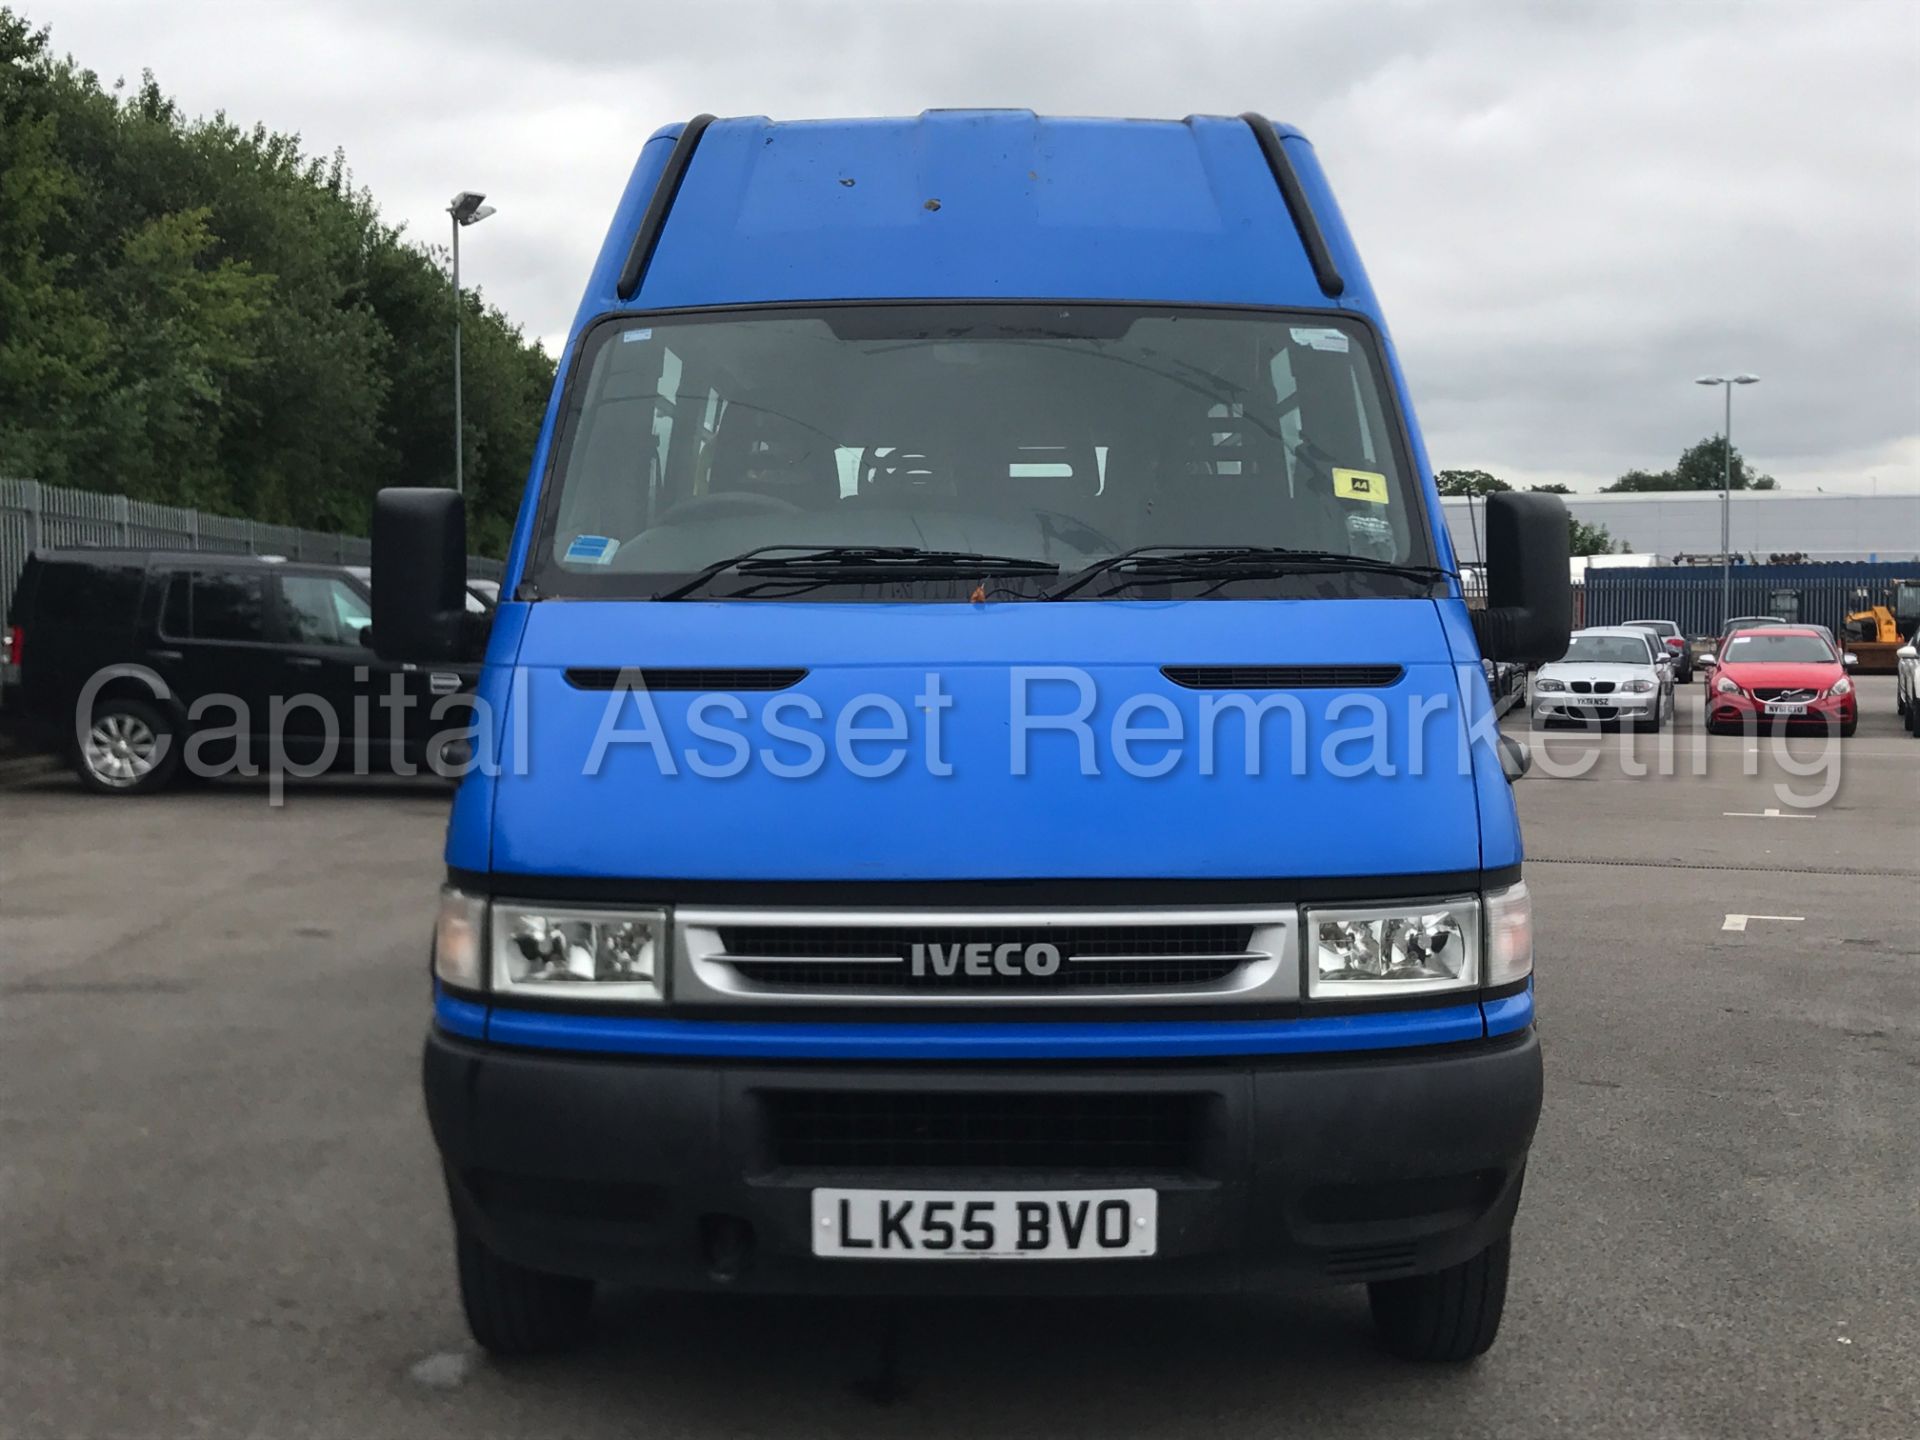 IVECO DAILY 40C14 '17 SEATER COACH / BUS' (2006 MODEL) '3.0 DIESEL - 6 SPEED' *IRIS BUS* (1 OWNER) - Image 3 of 23